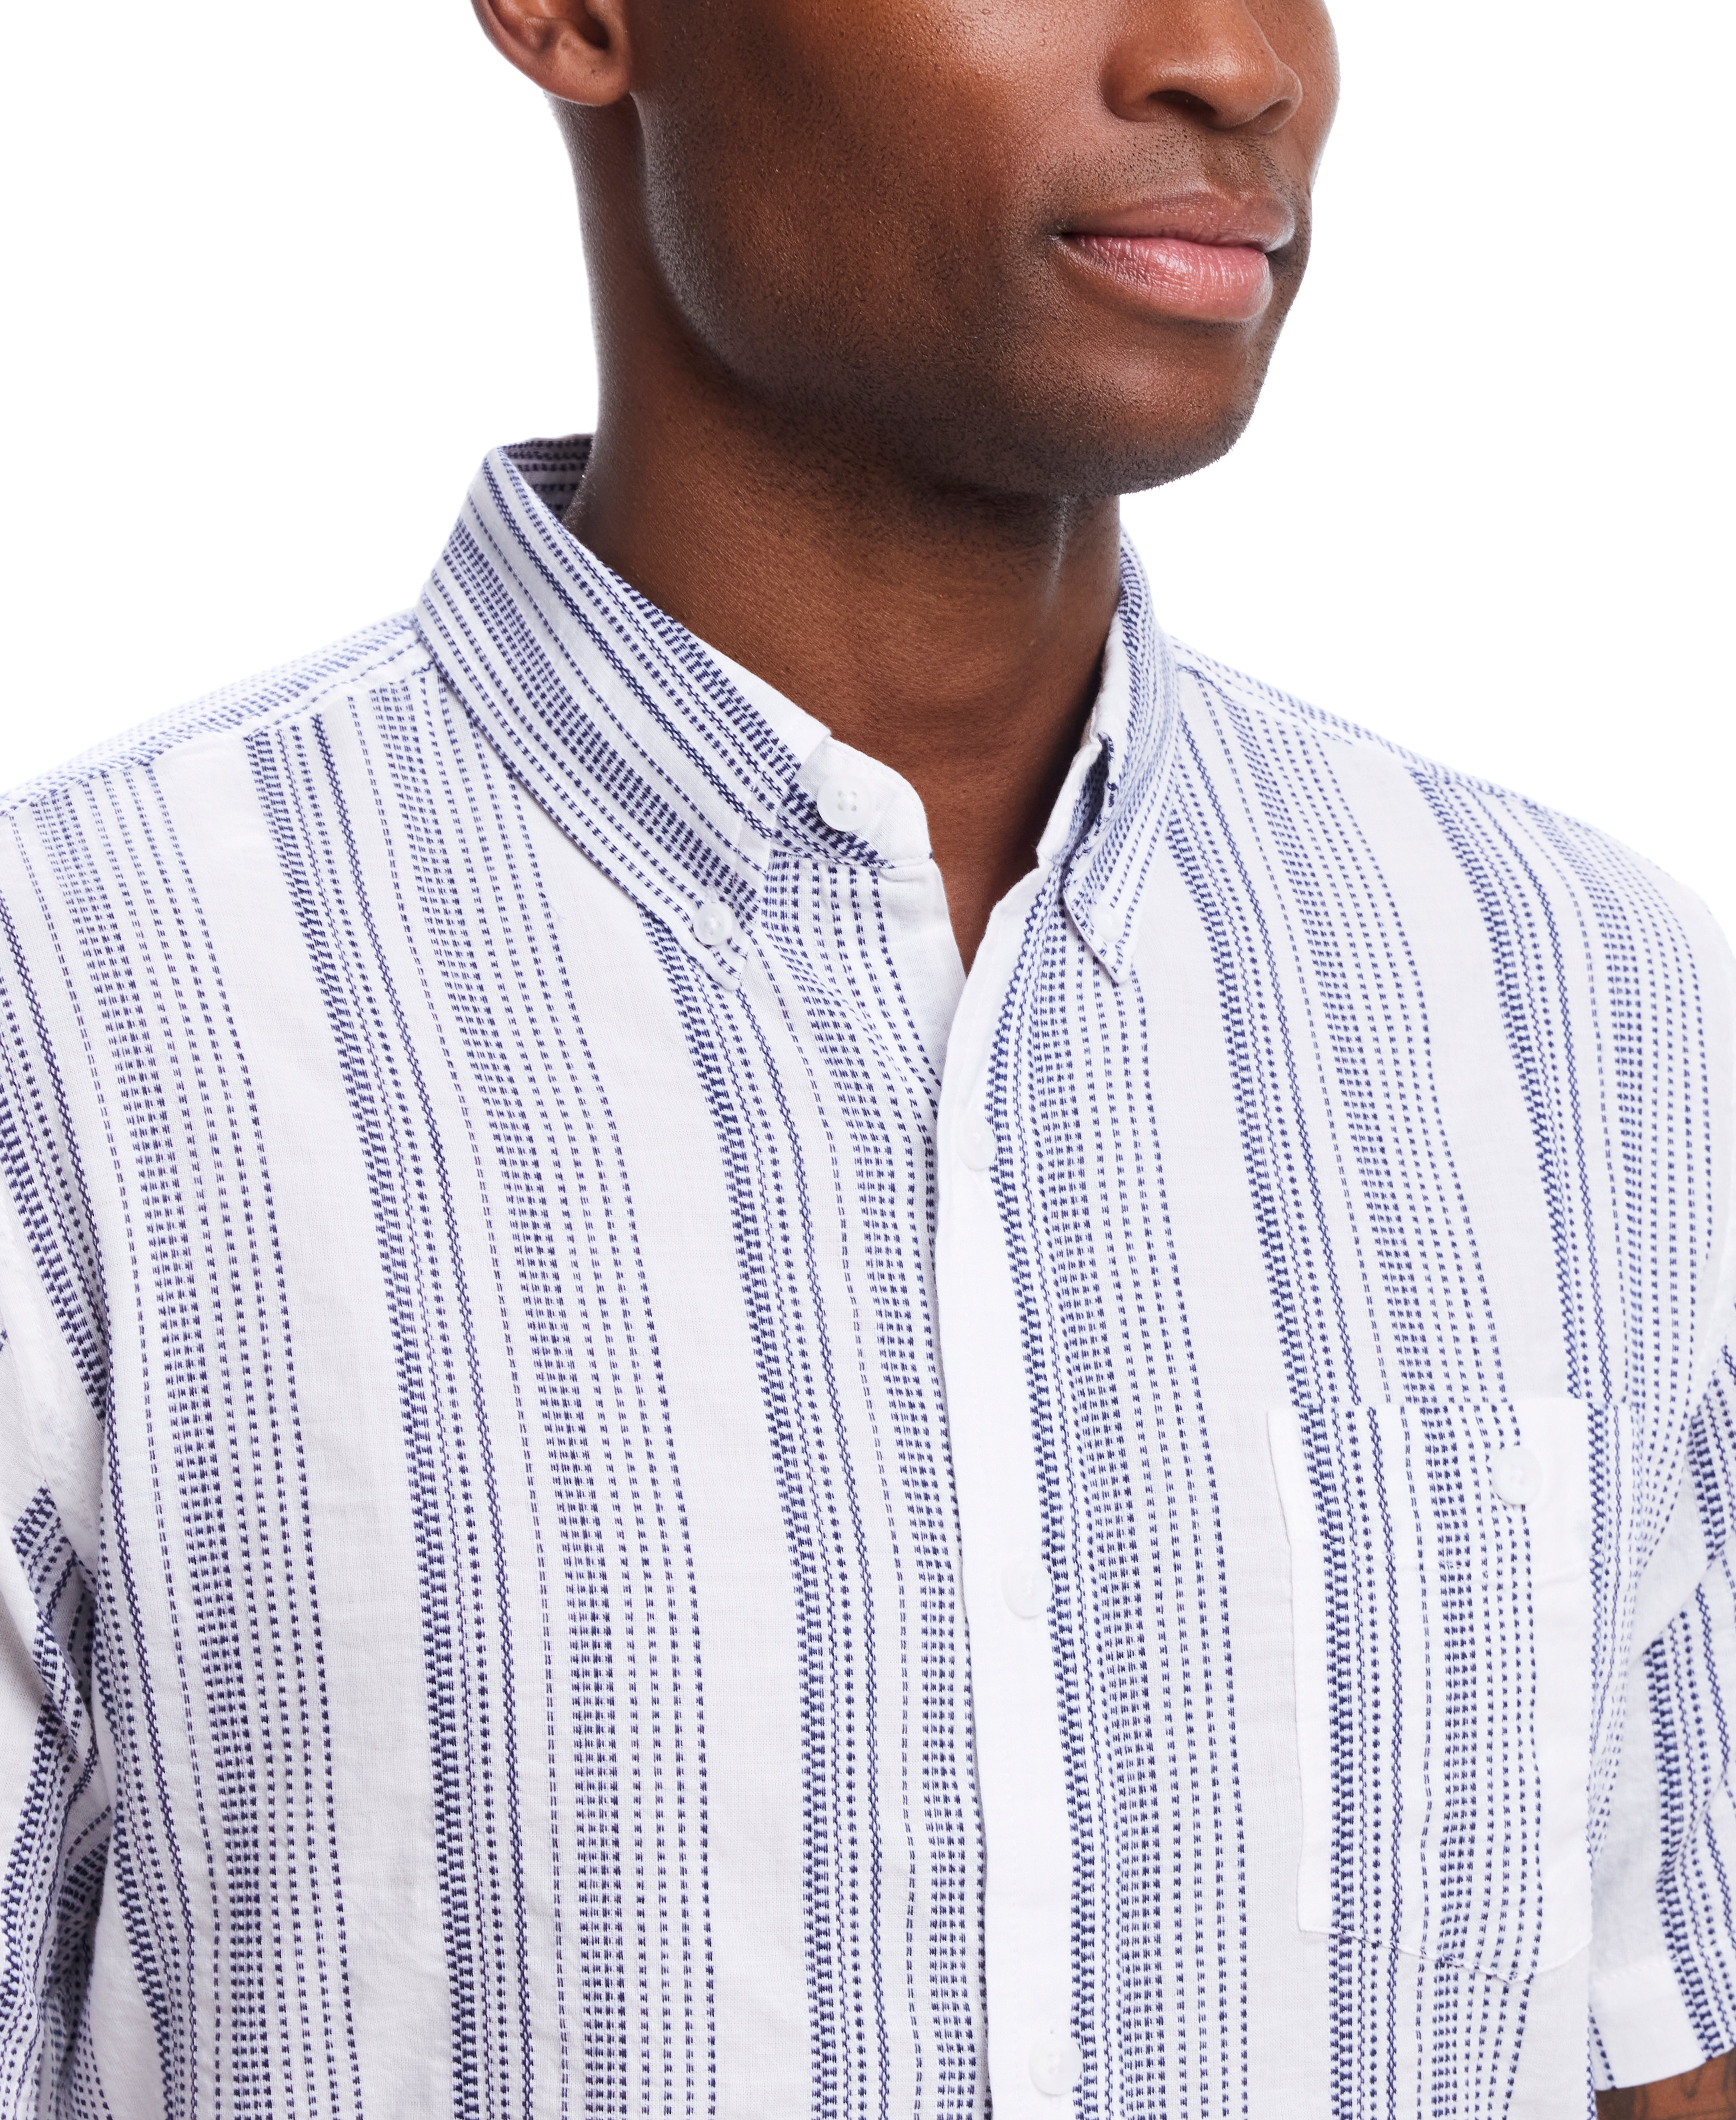 Short Sleeve Cotton Shirt With Ticking Stripe In Cloud